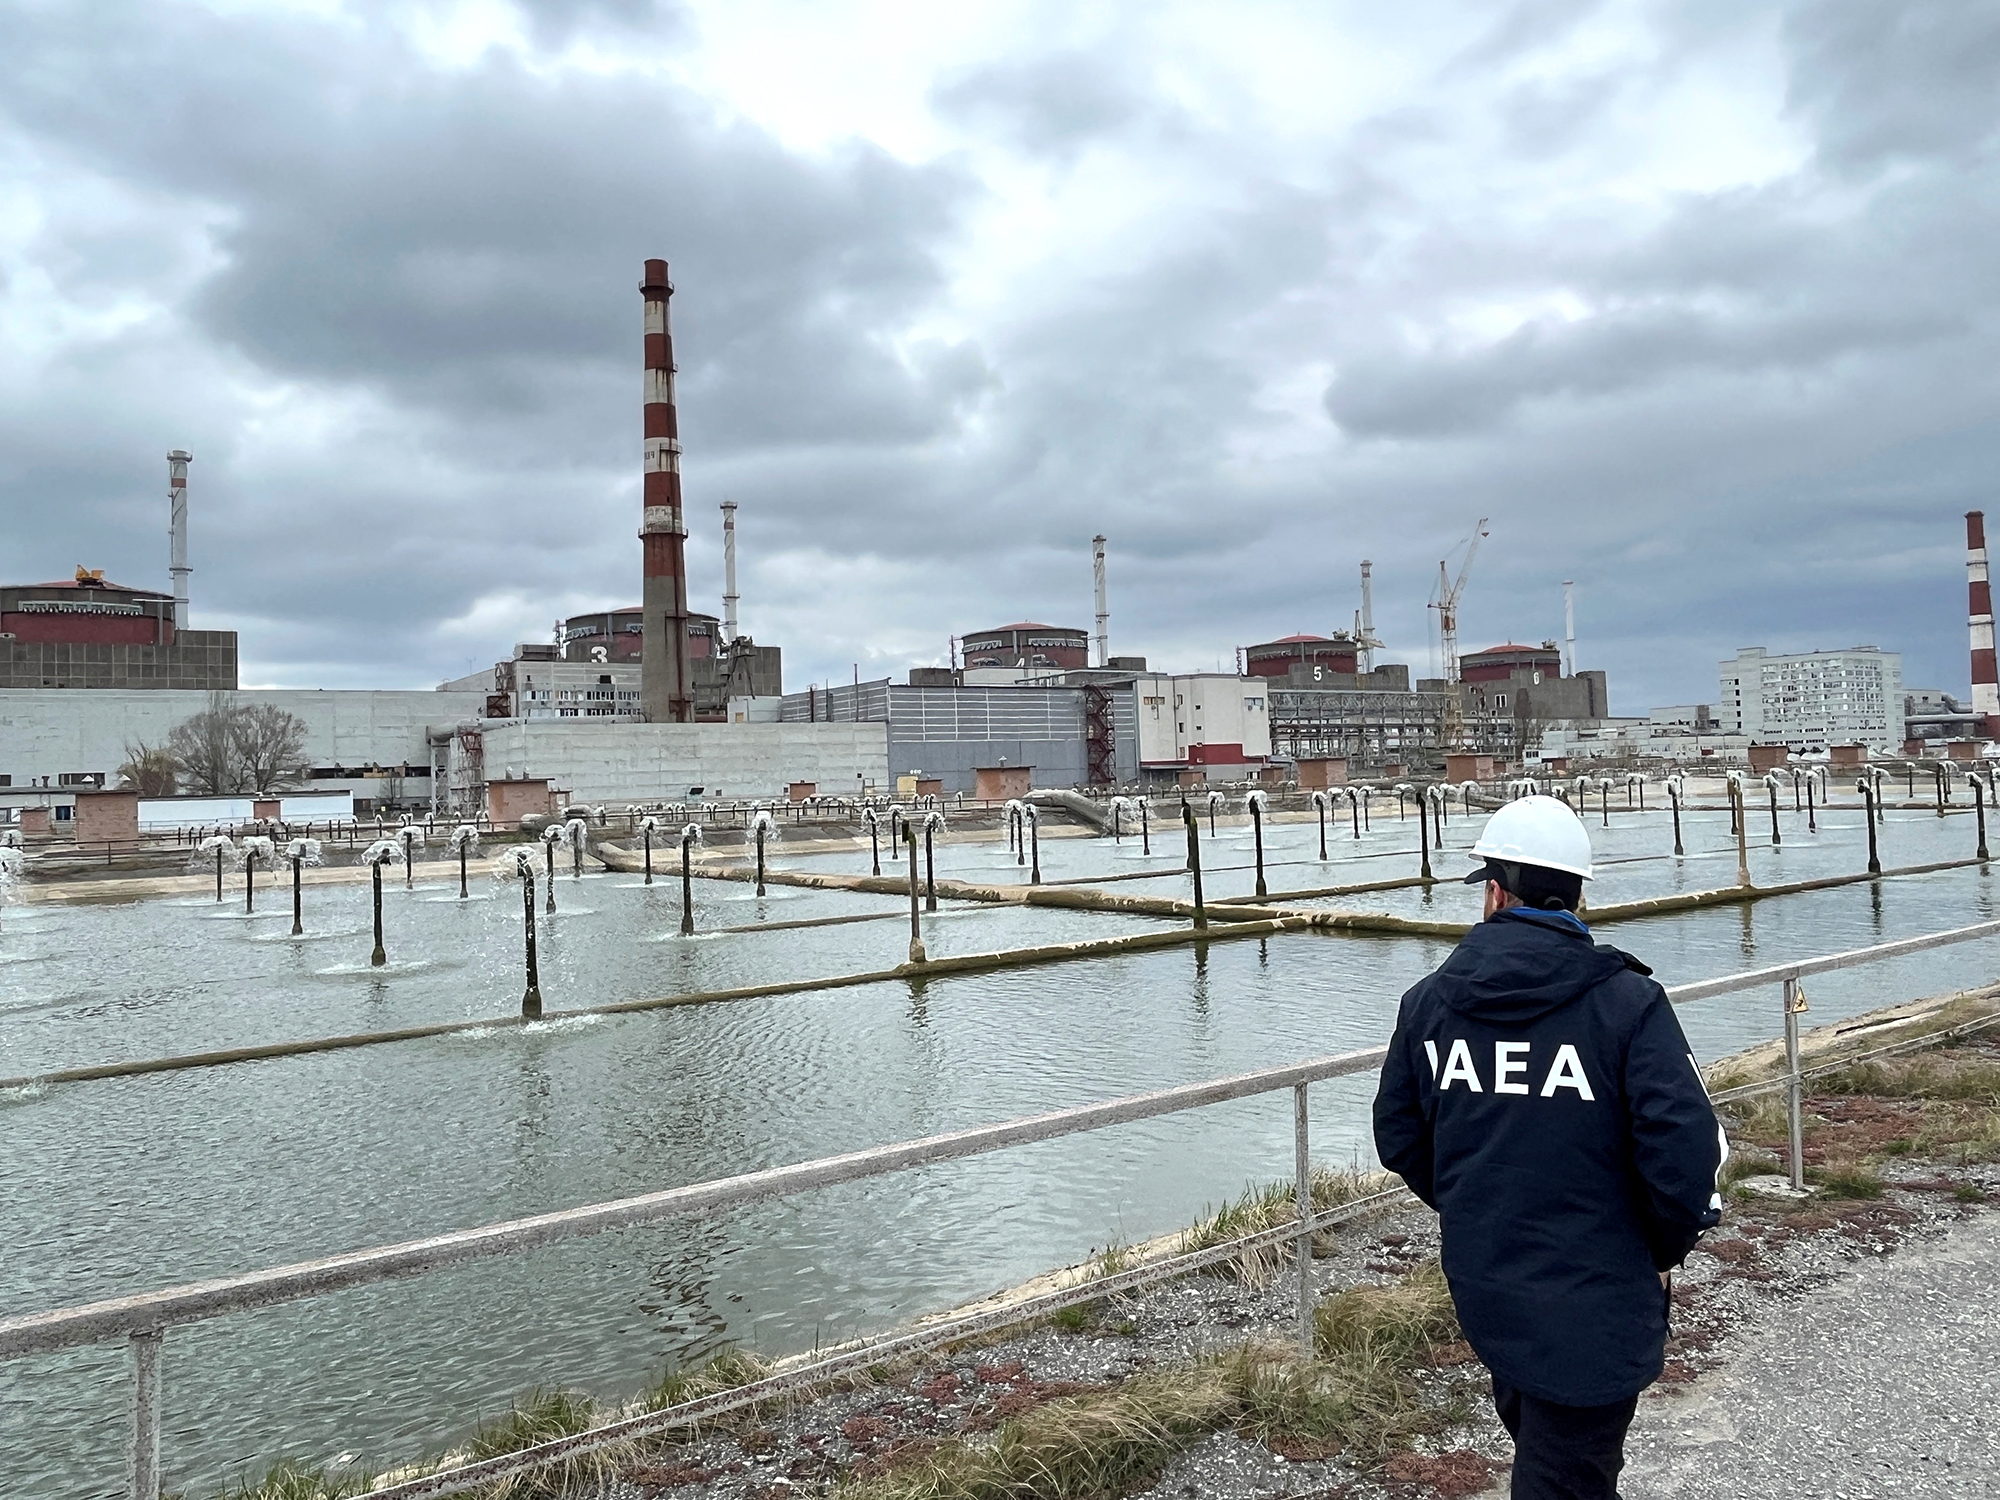 A member of the International Atomic Energy Agency (IAEA) expert mission tours the Zaporizhzhia nuclear power plant in the Zaporizhzhia region of Russian-controlled Ukraine, on March 29.